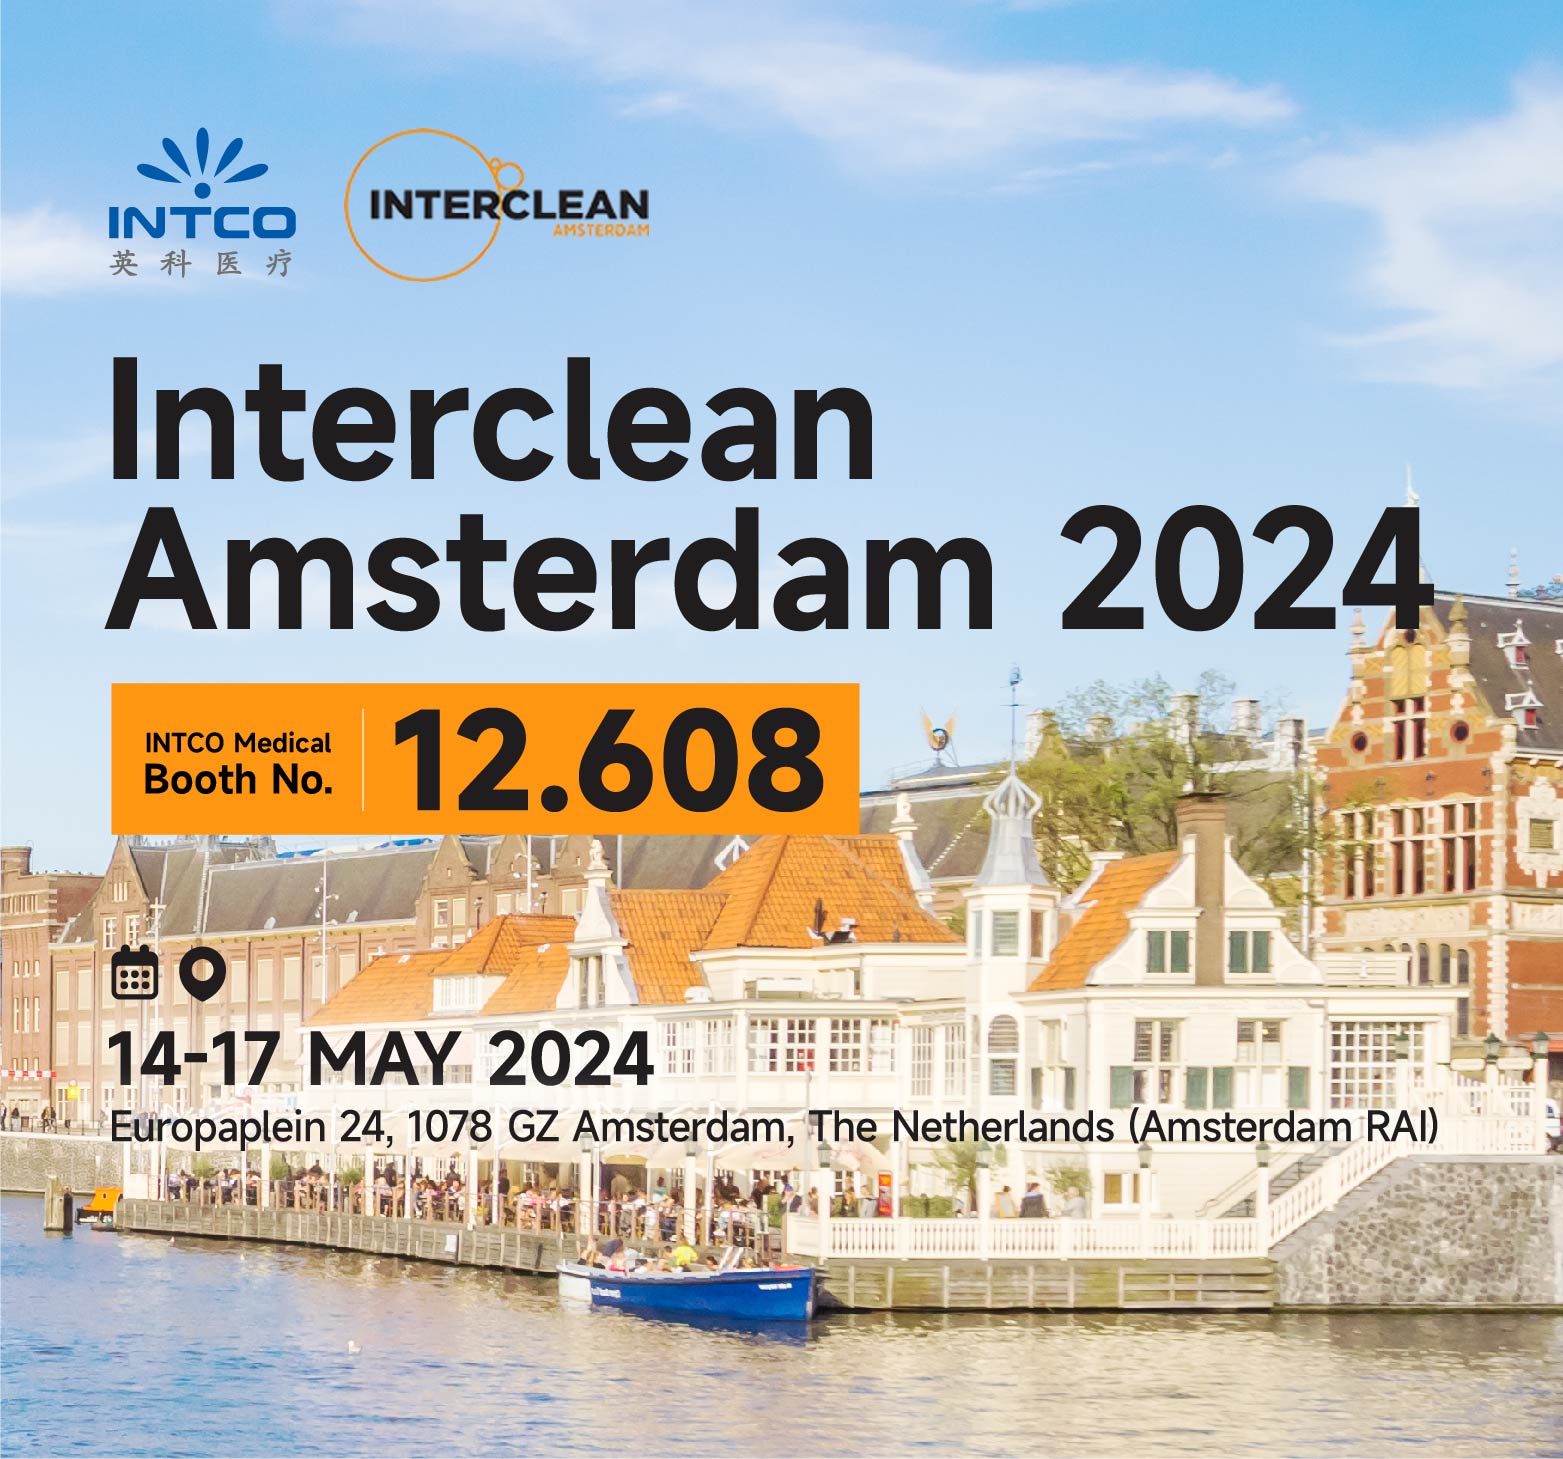 INTCO Medial attends the Interclean Amsterdam 2024